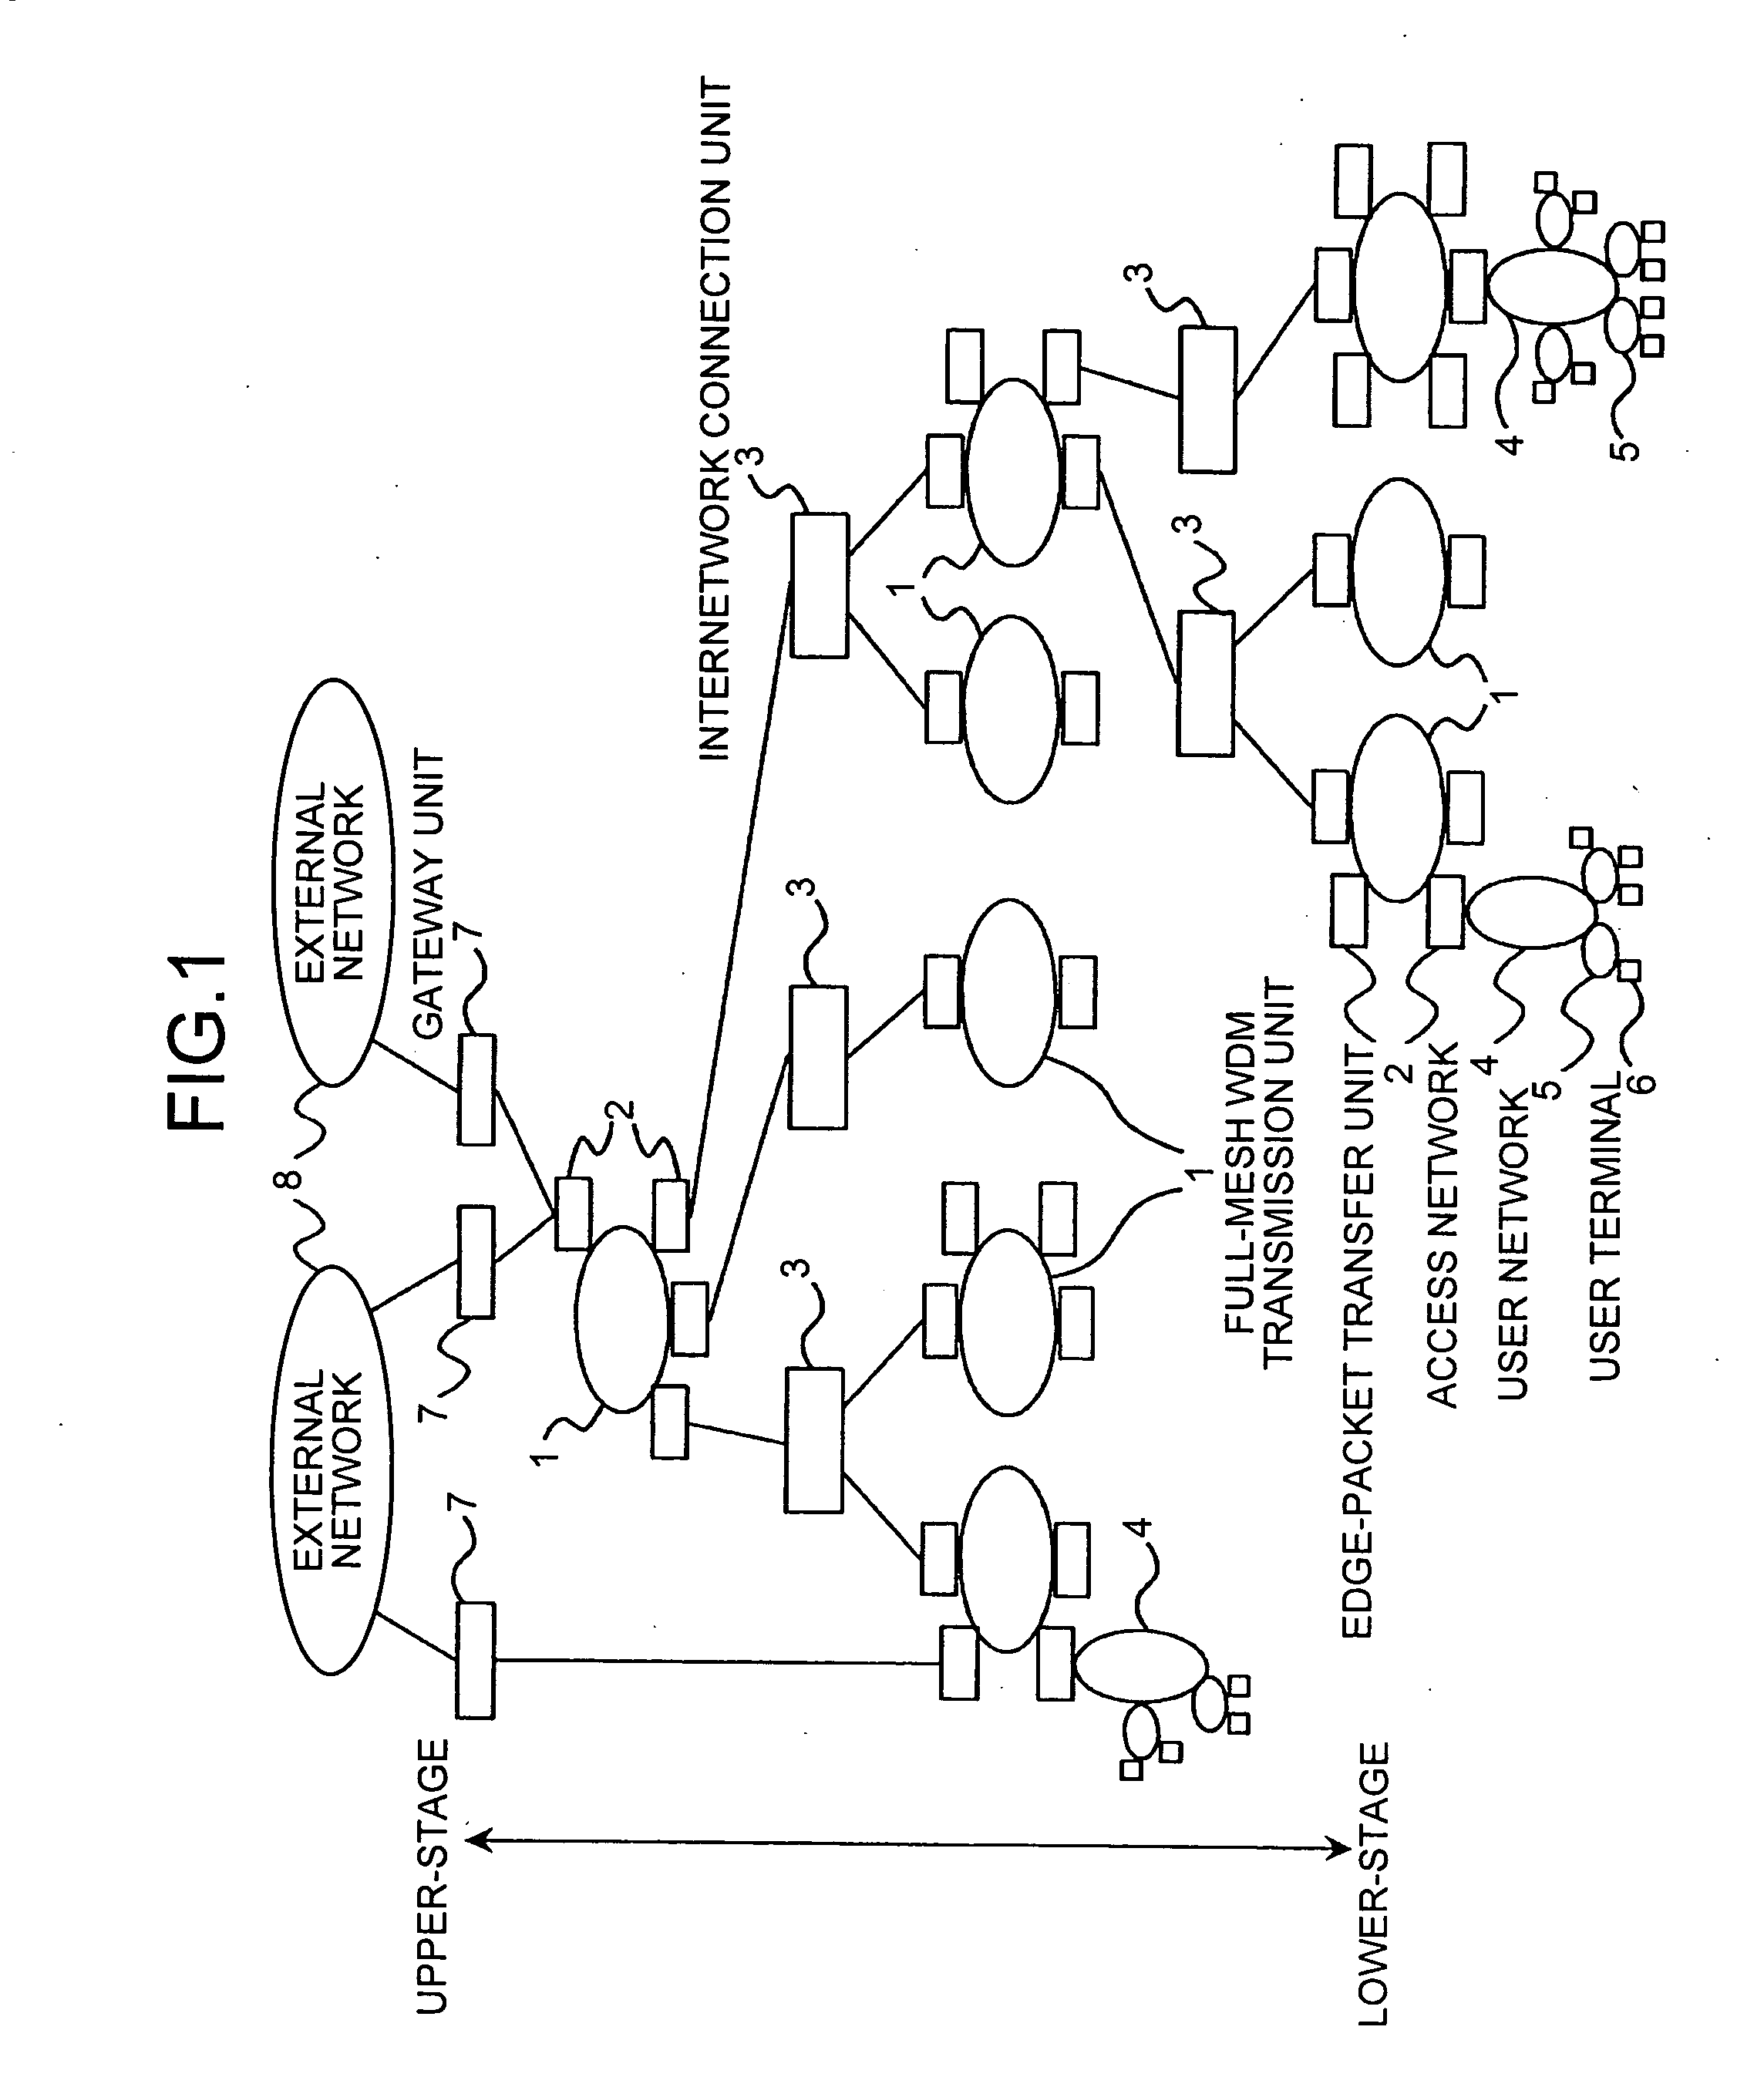 Packet Communication Network and Packet Communication Method